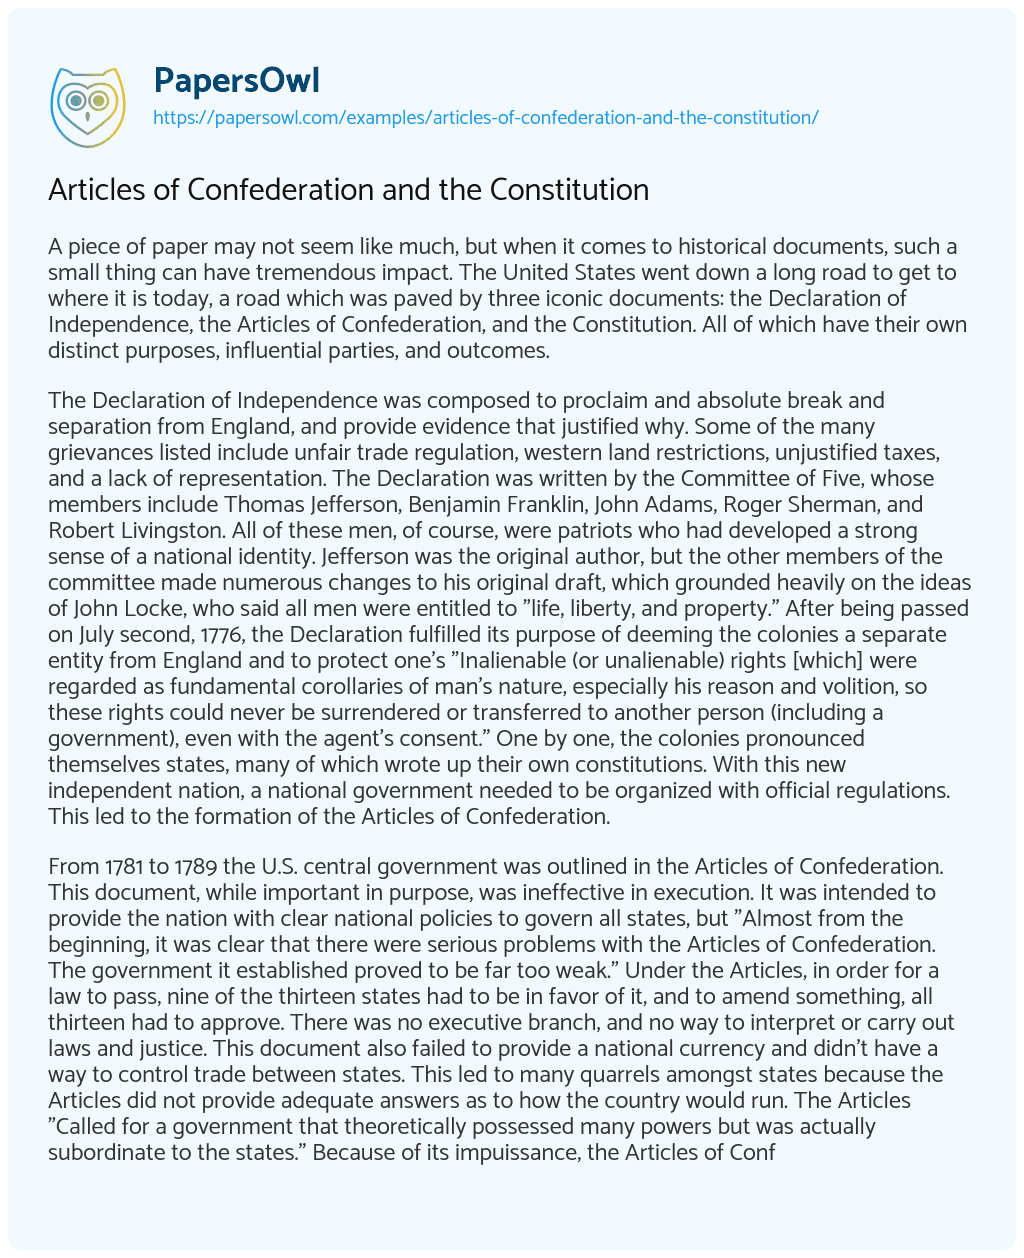 Articles of Confederation and the Constitution essay